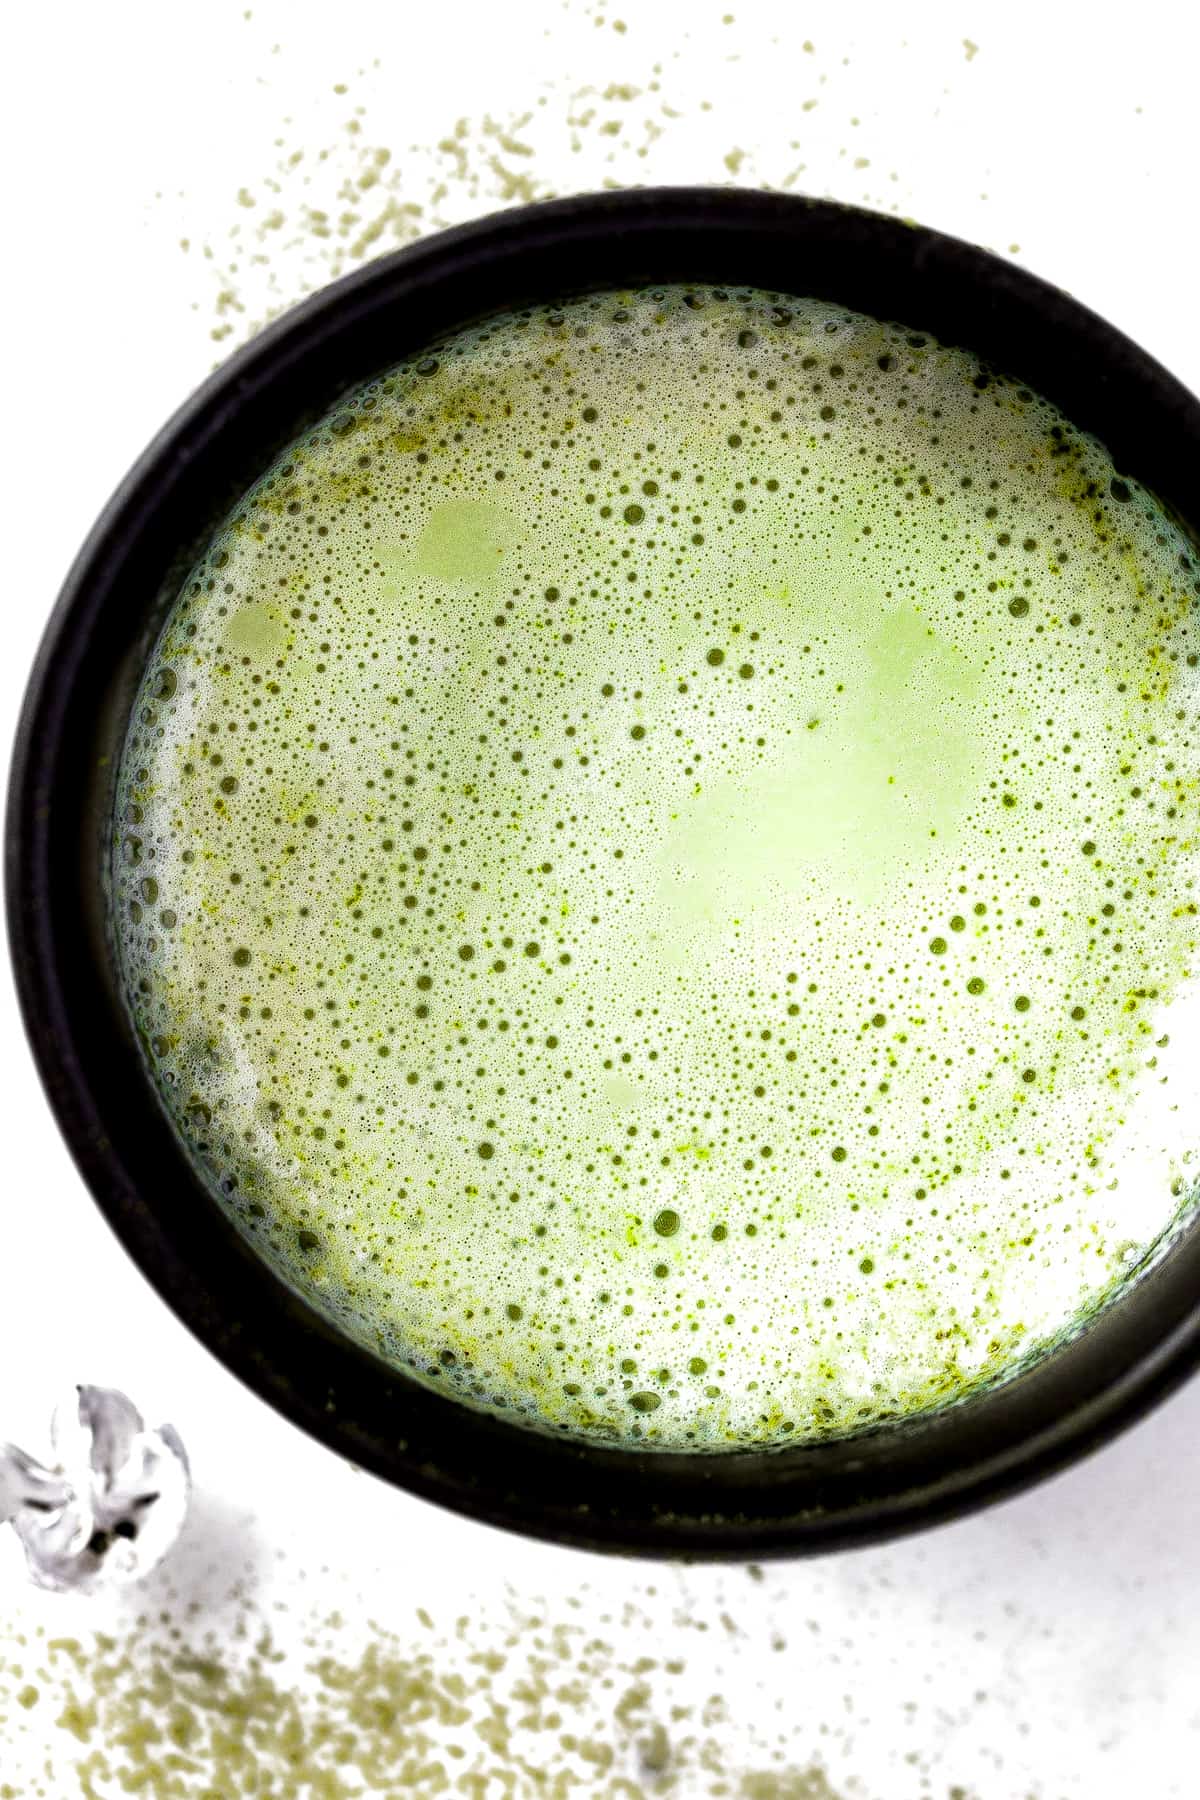 Overhead view of a frothy oat milk matcha latte in a black mug.